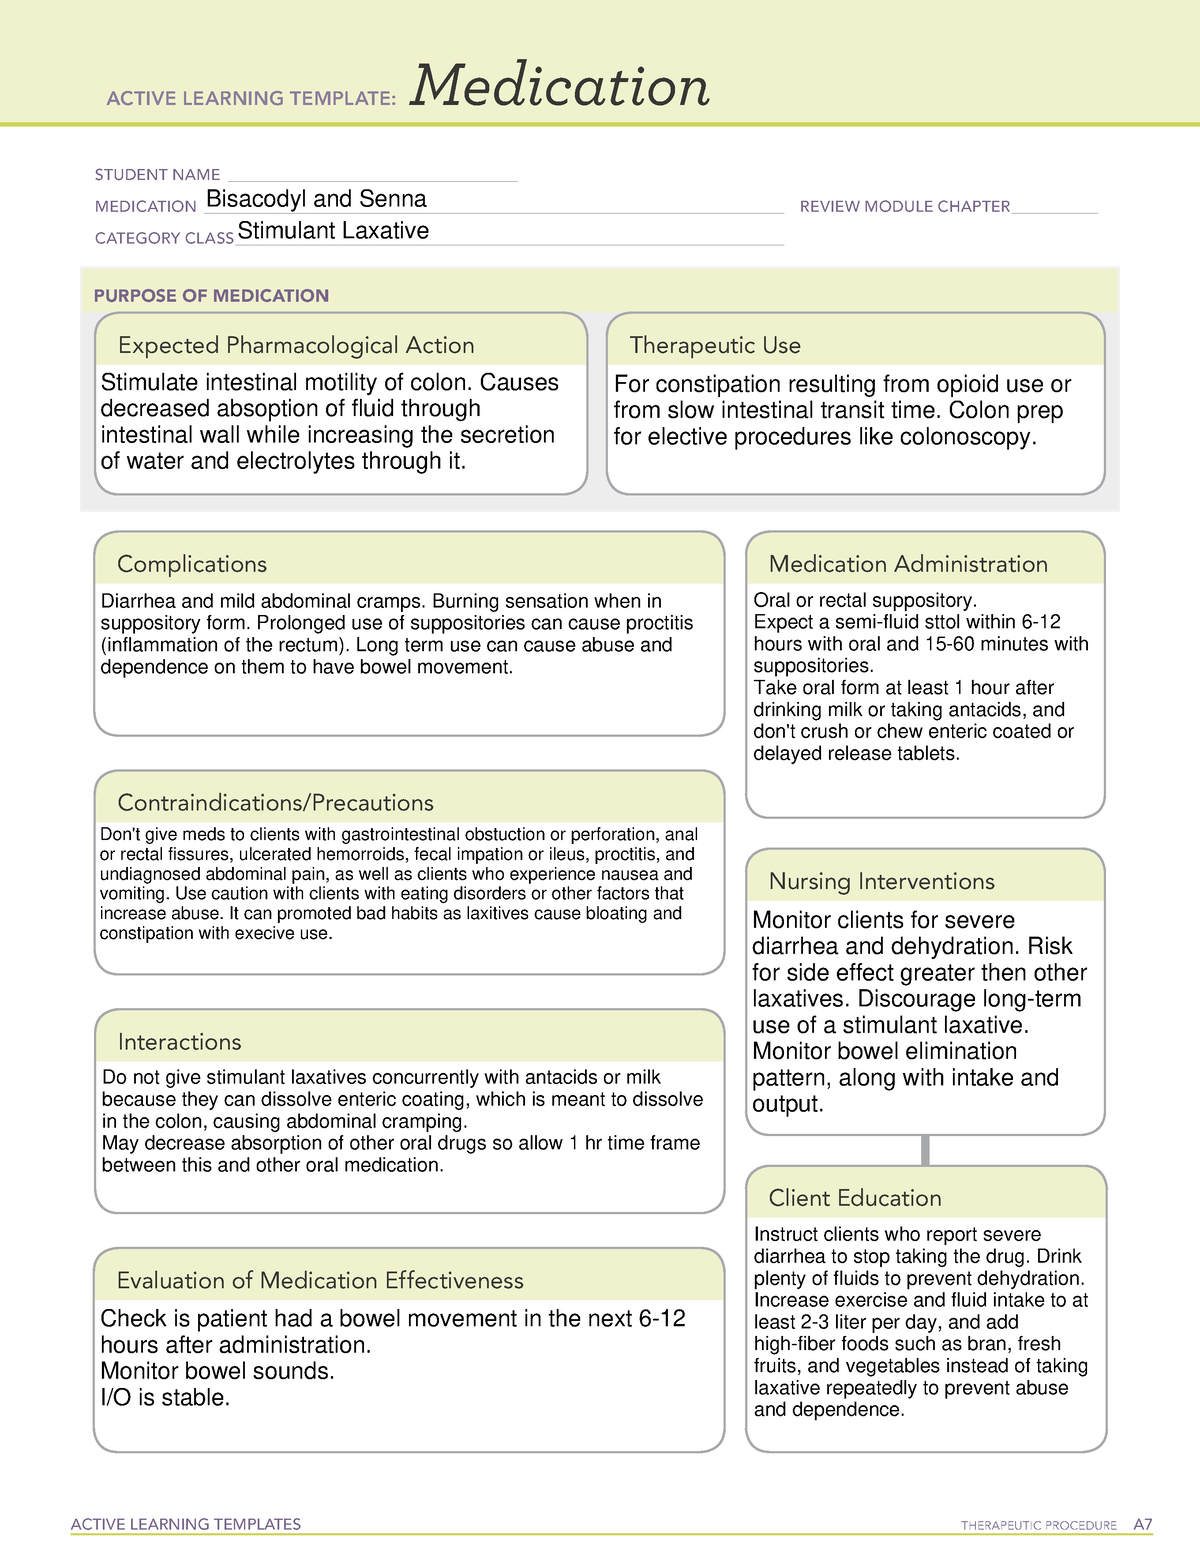 Bisacodyl and Senna med sheet ACTIVE LEARNING TEMPLATES THERAPEUTIC